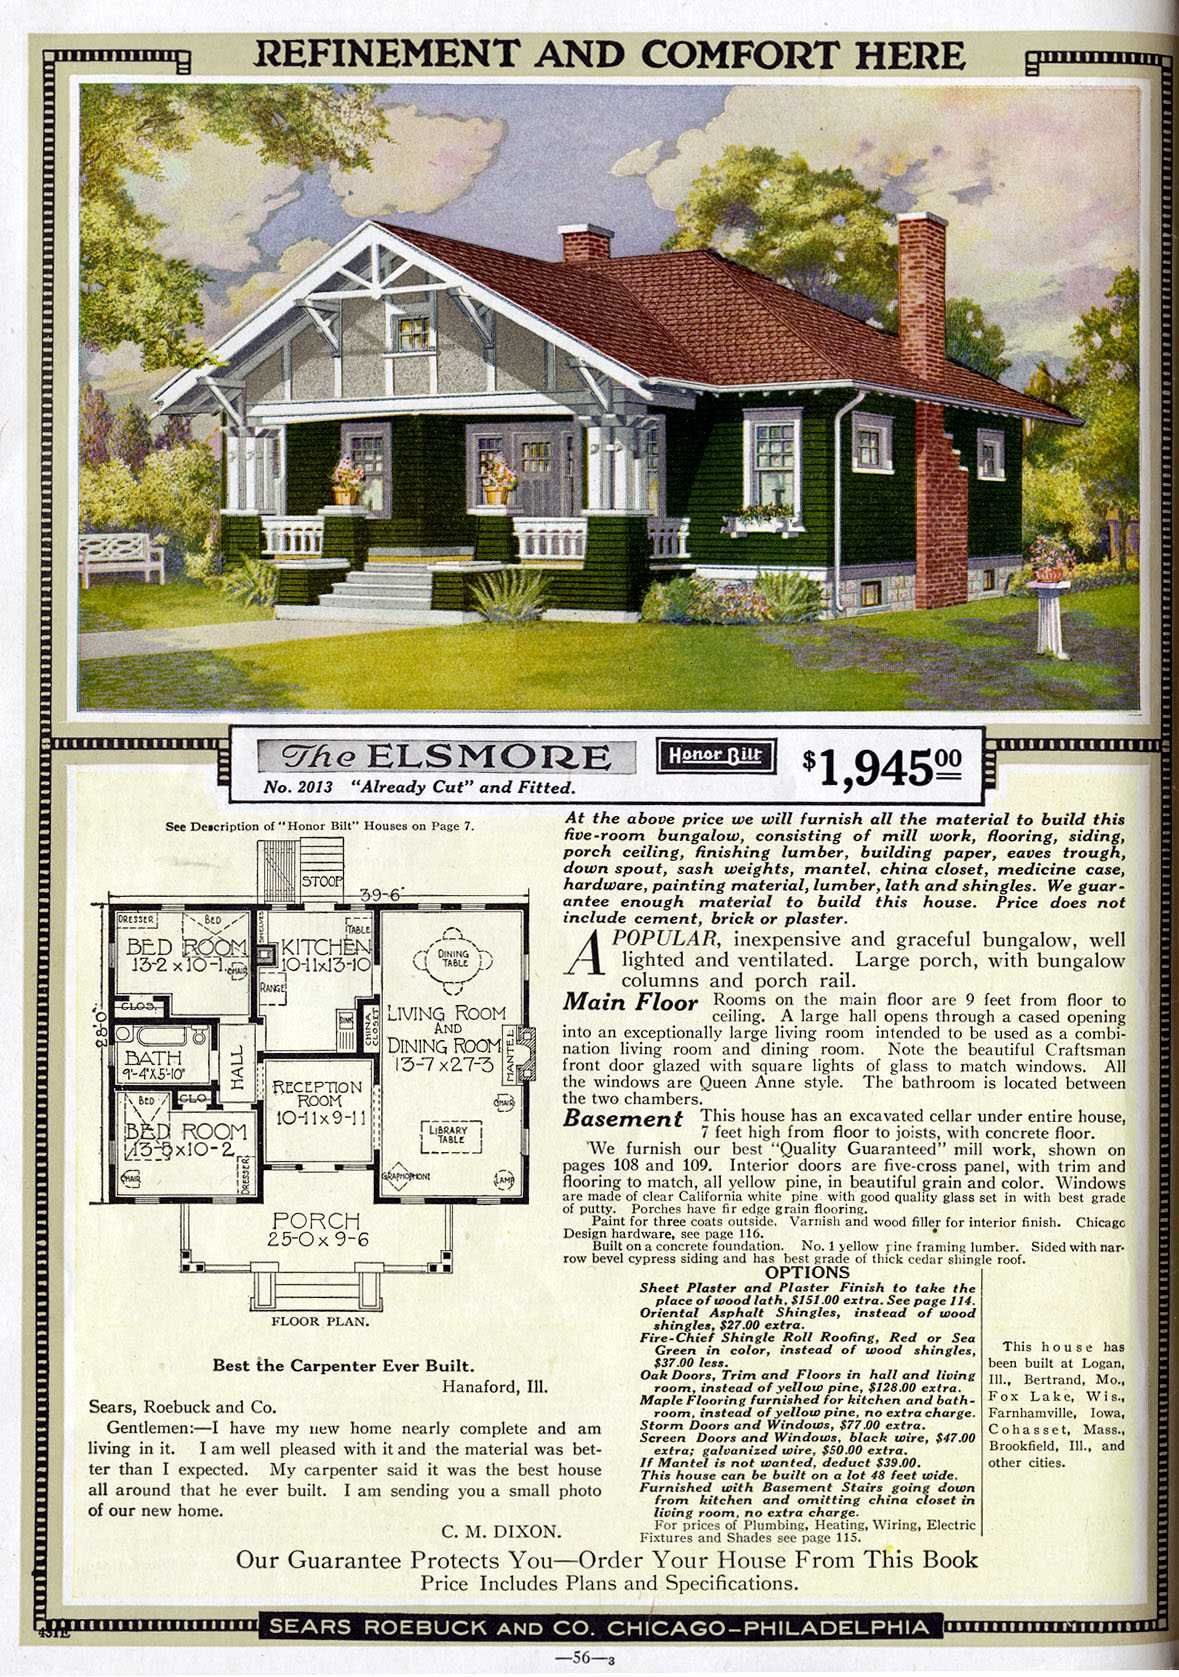 Sears Sold 70 000 Homes From Their